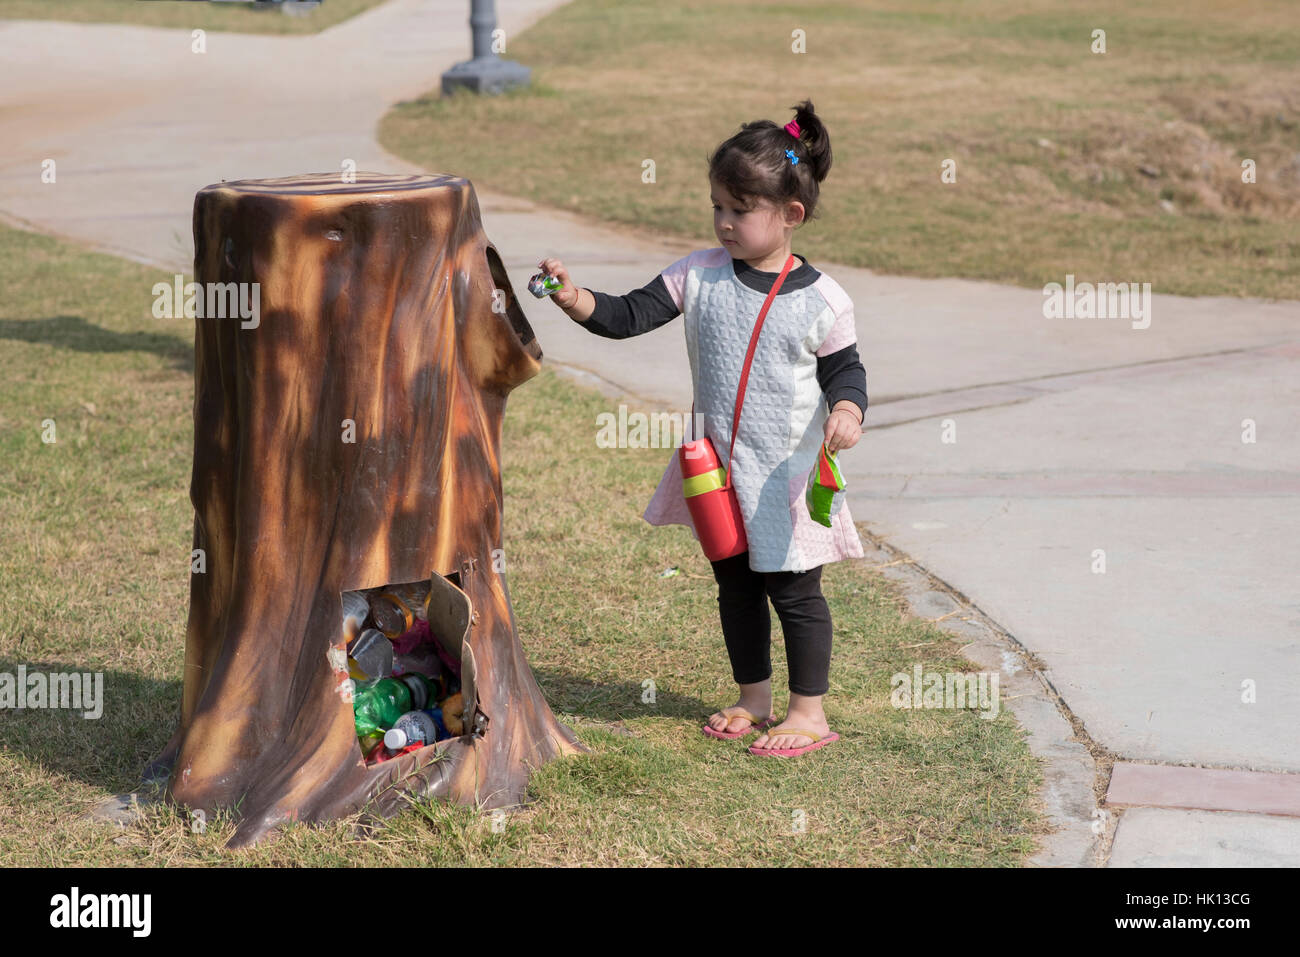 Cute little girl putting waste in the bin outdoor in a park. Stock Photo